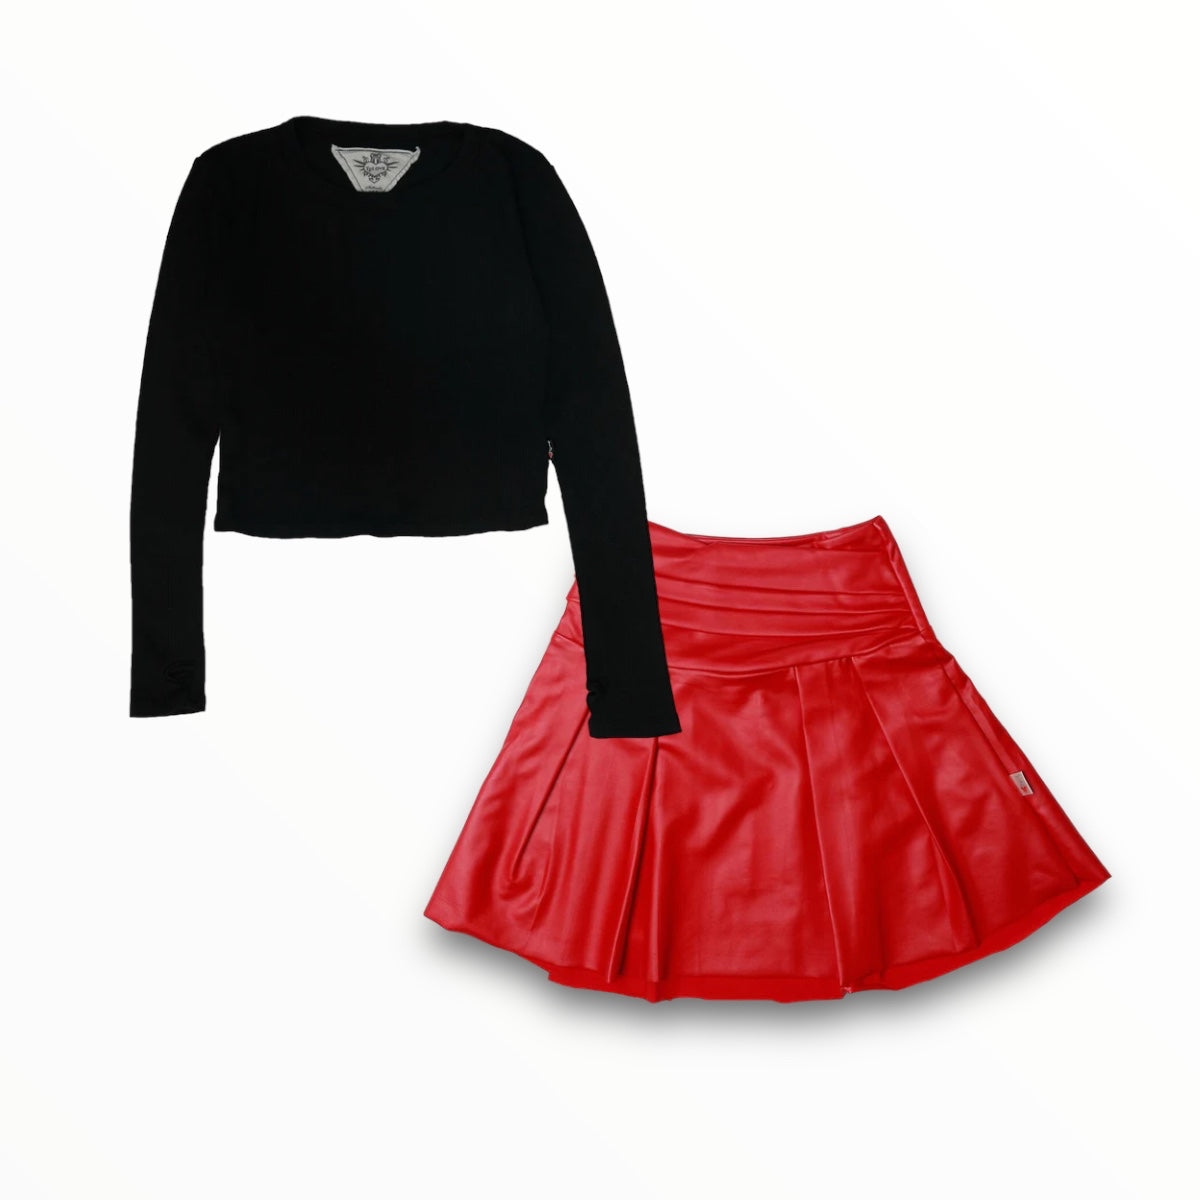 T2LOVE LAYERED WAIST SKIRT - RED PLEATHER